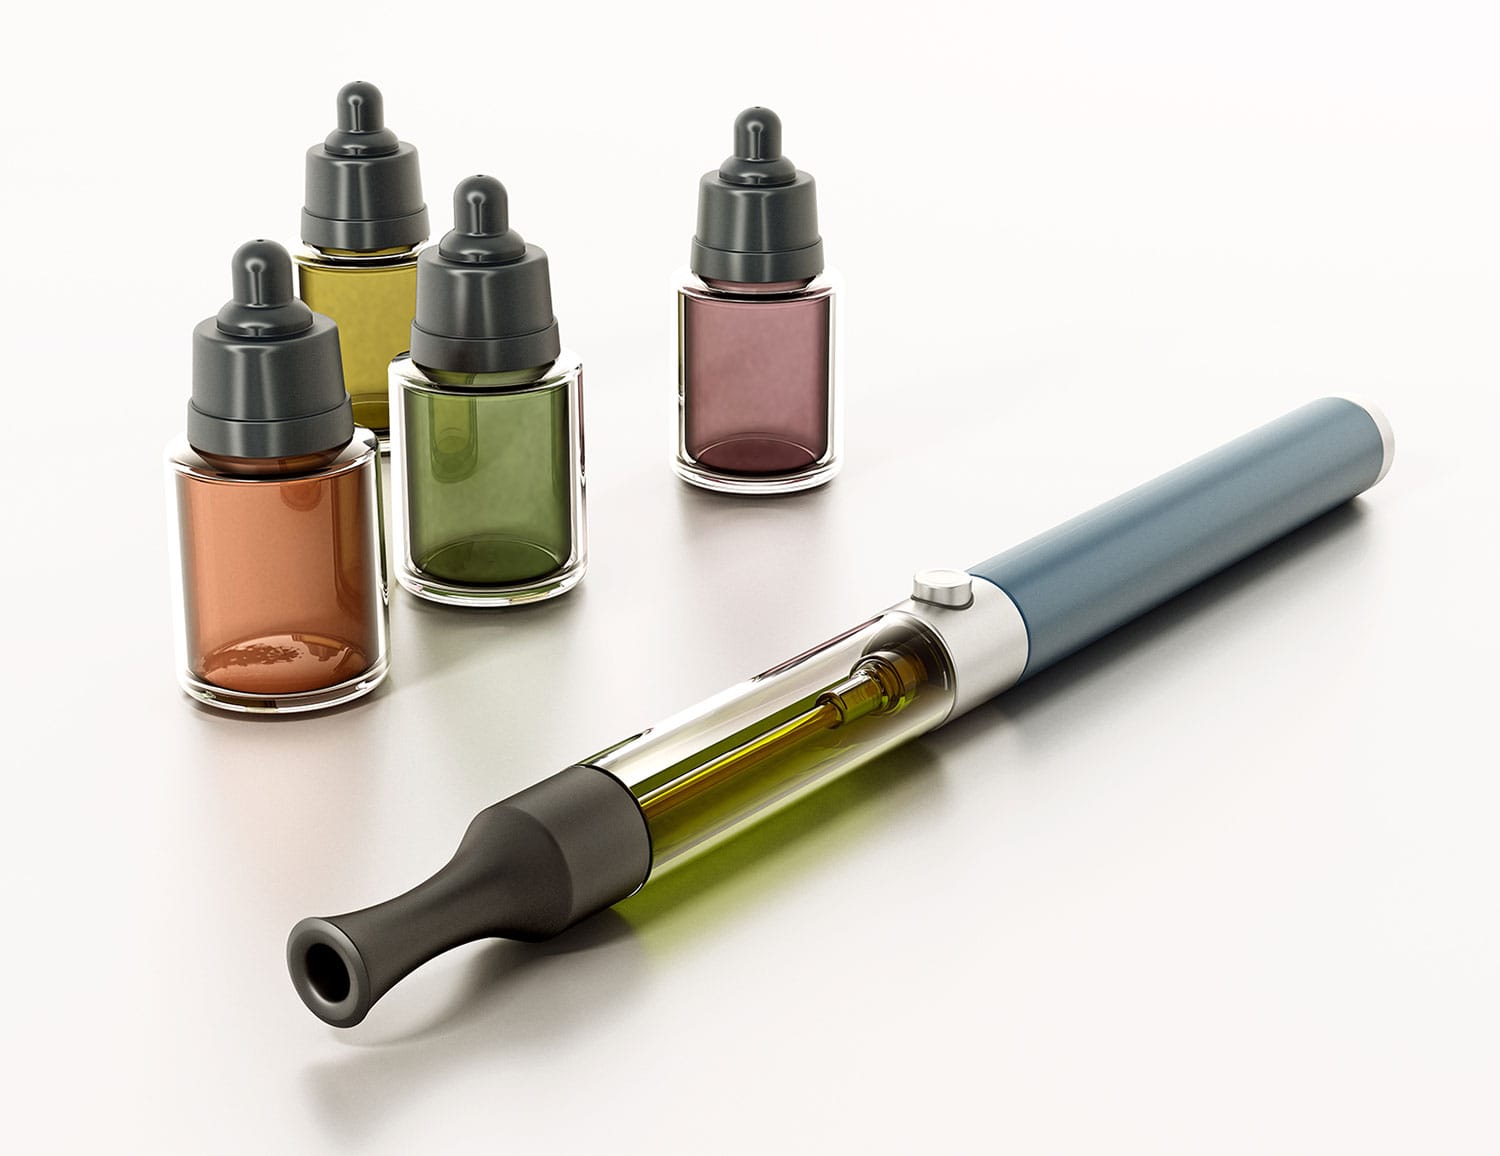 Makers of E-Cigarettes Tout Role in Smoking Cessation